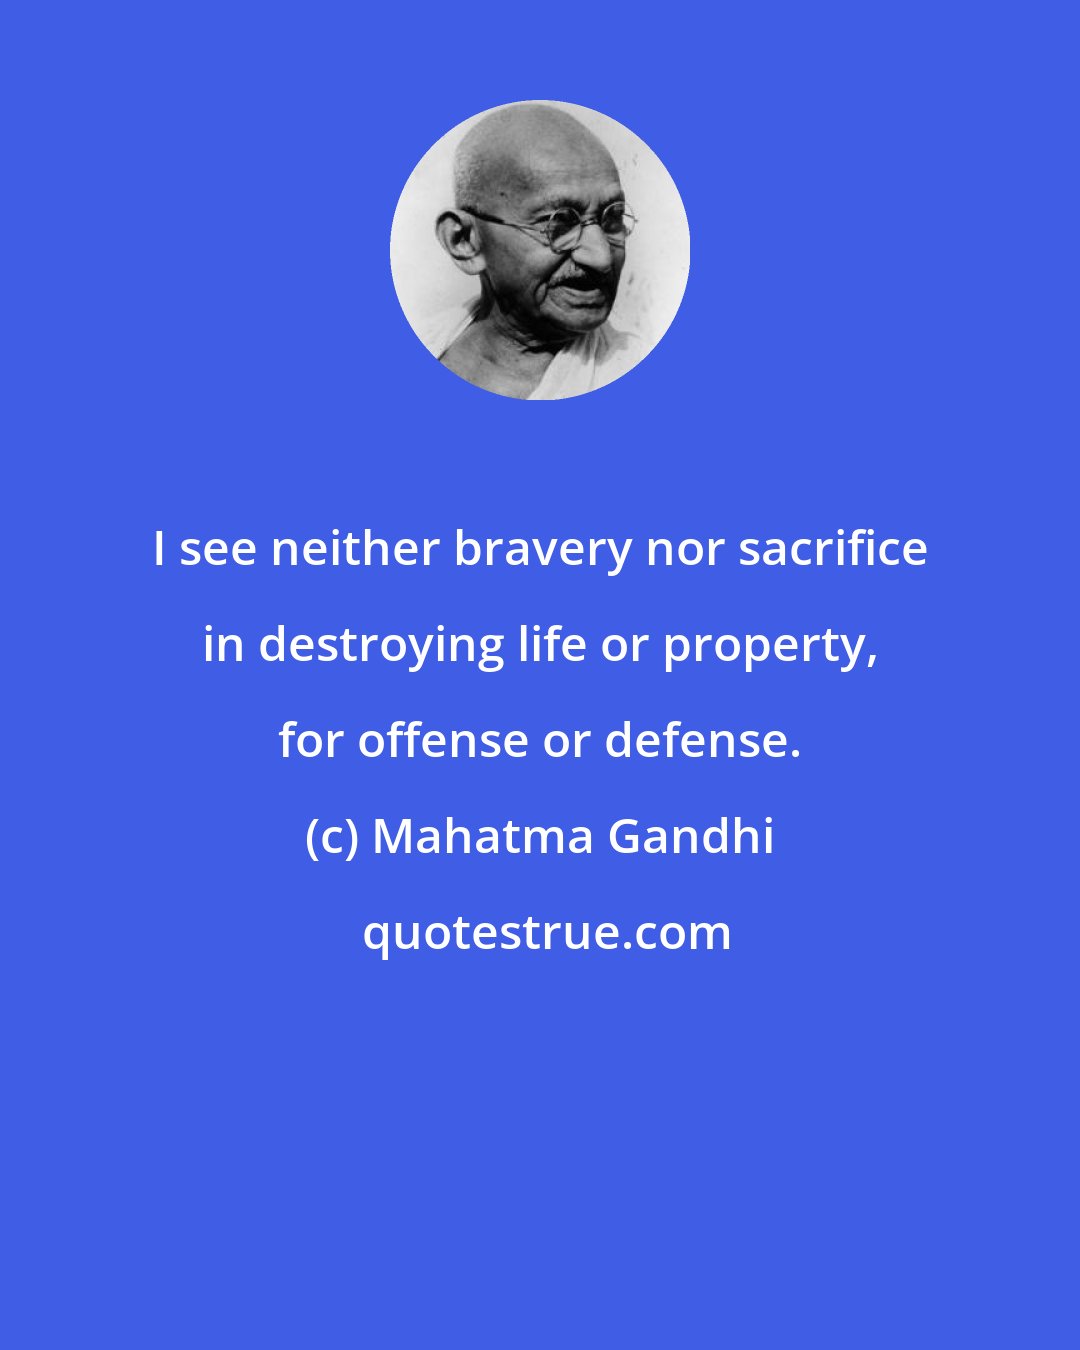 Mahatma Gandhi: I see neither bravery nor sacrifice in destroying life or property, for offense or defense.